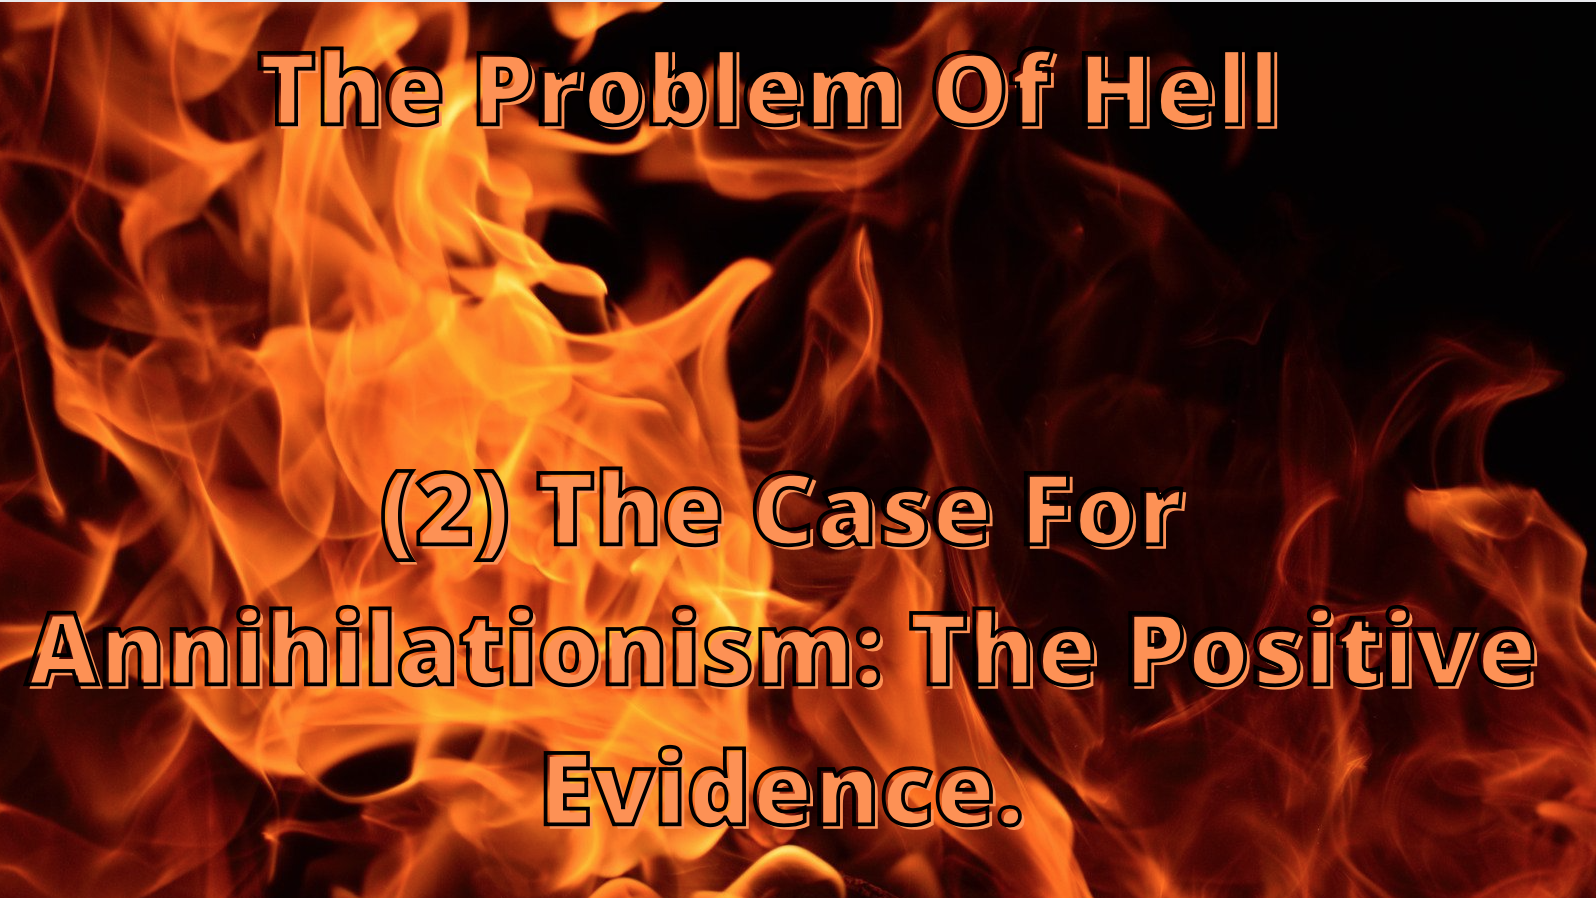 The Problem Of Hell (2) - The Case For Annihilationism: The Positive Evidence